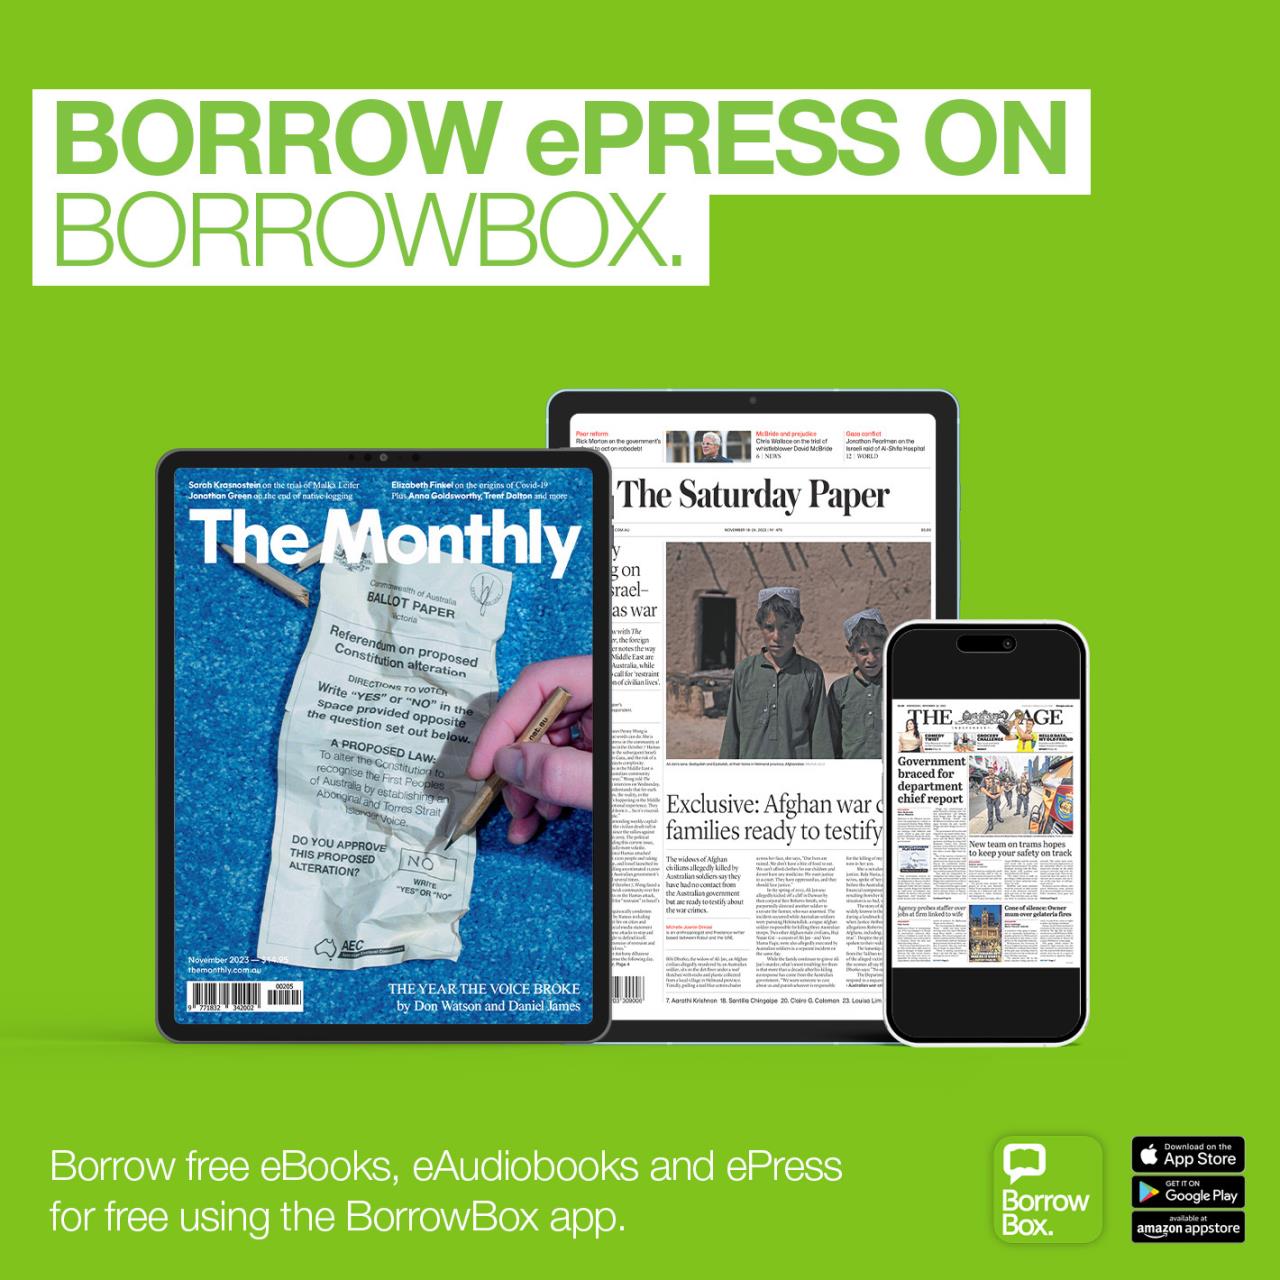 eNewspapers are now on BorrowBox